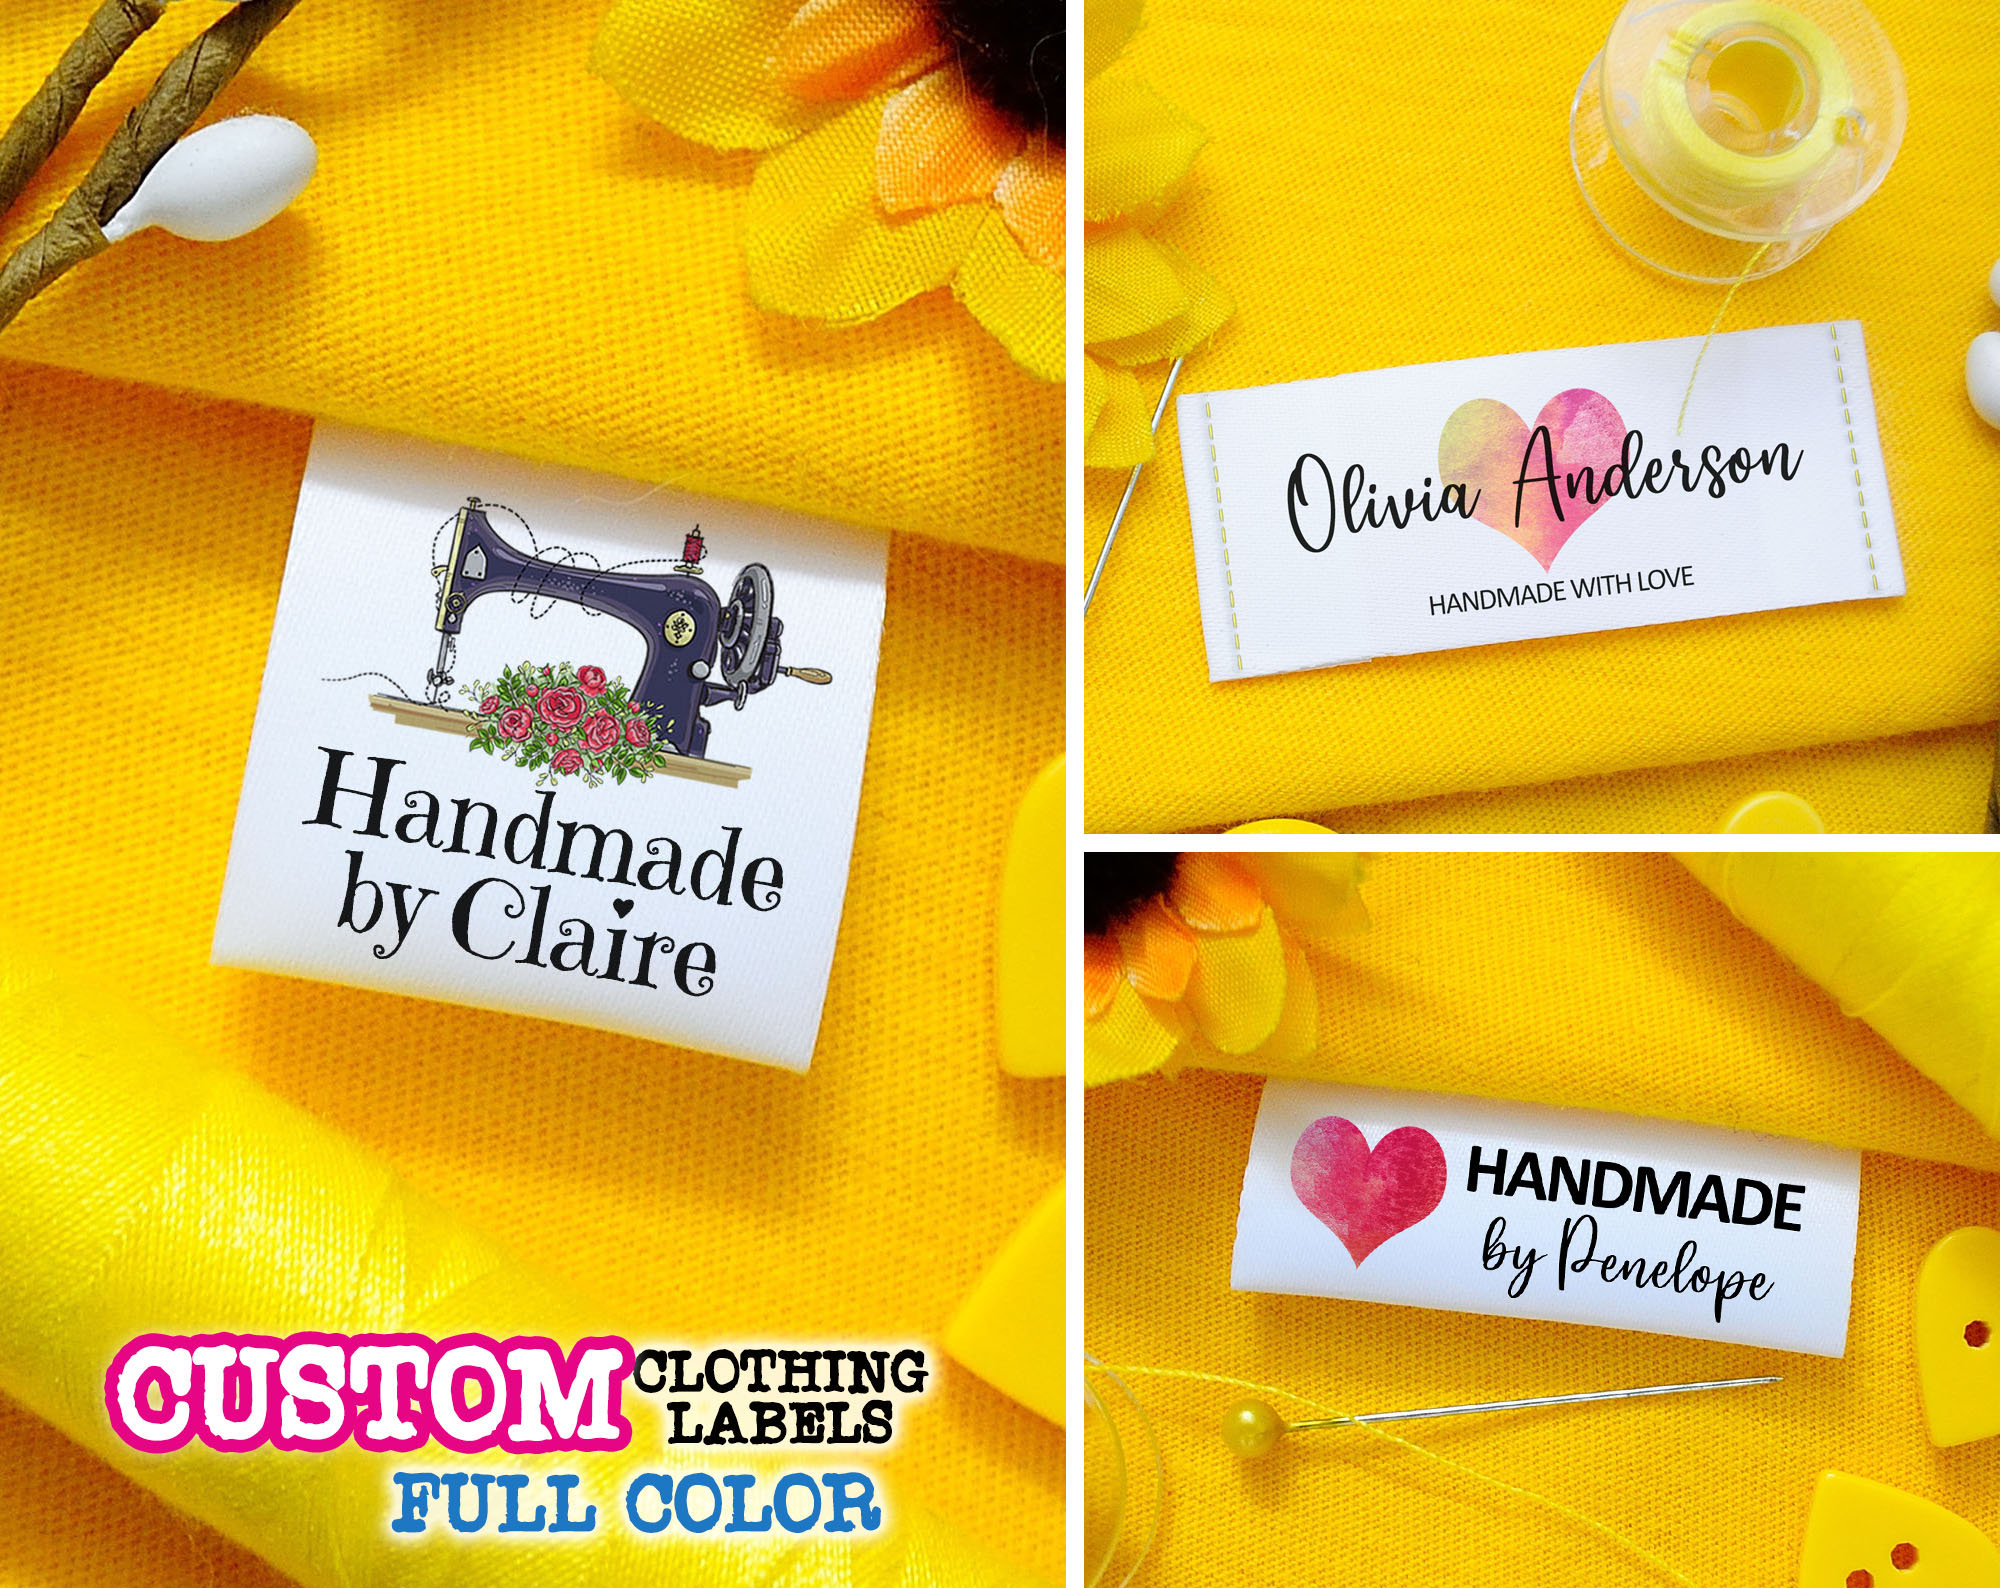 Personalized Sewing Labels for Handmade Items,Custom Sewing Label, Custom  Clothing Labels,Customized with Your Business Name (2,100 Pcs)